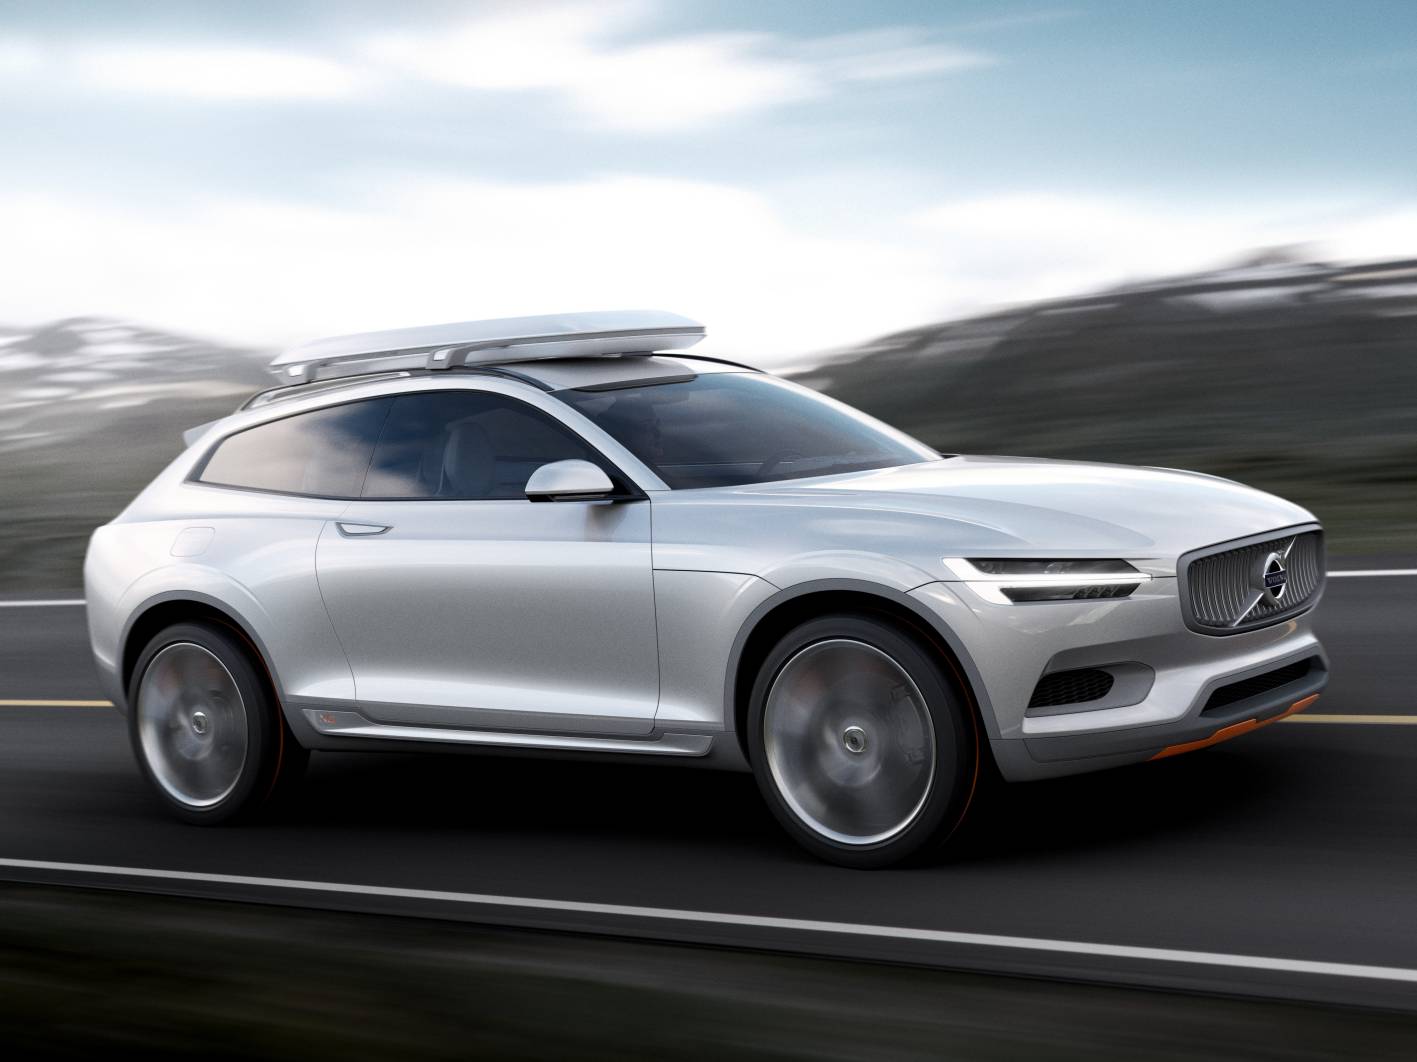 Volvo Concept XC Coupe revealed, previews next XC90